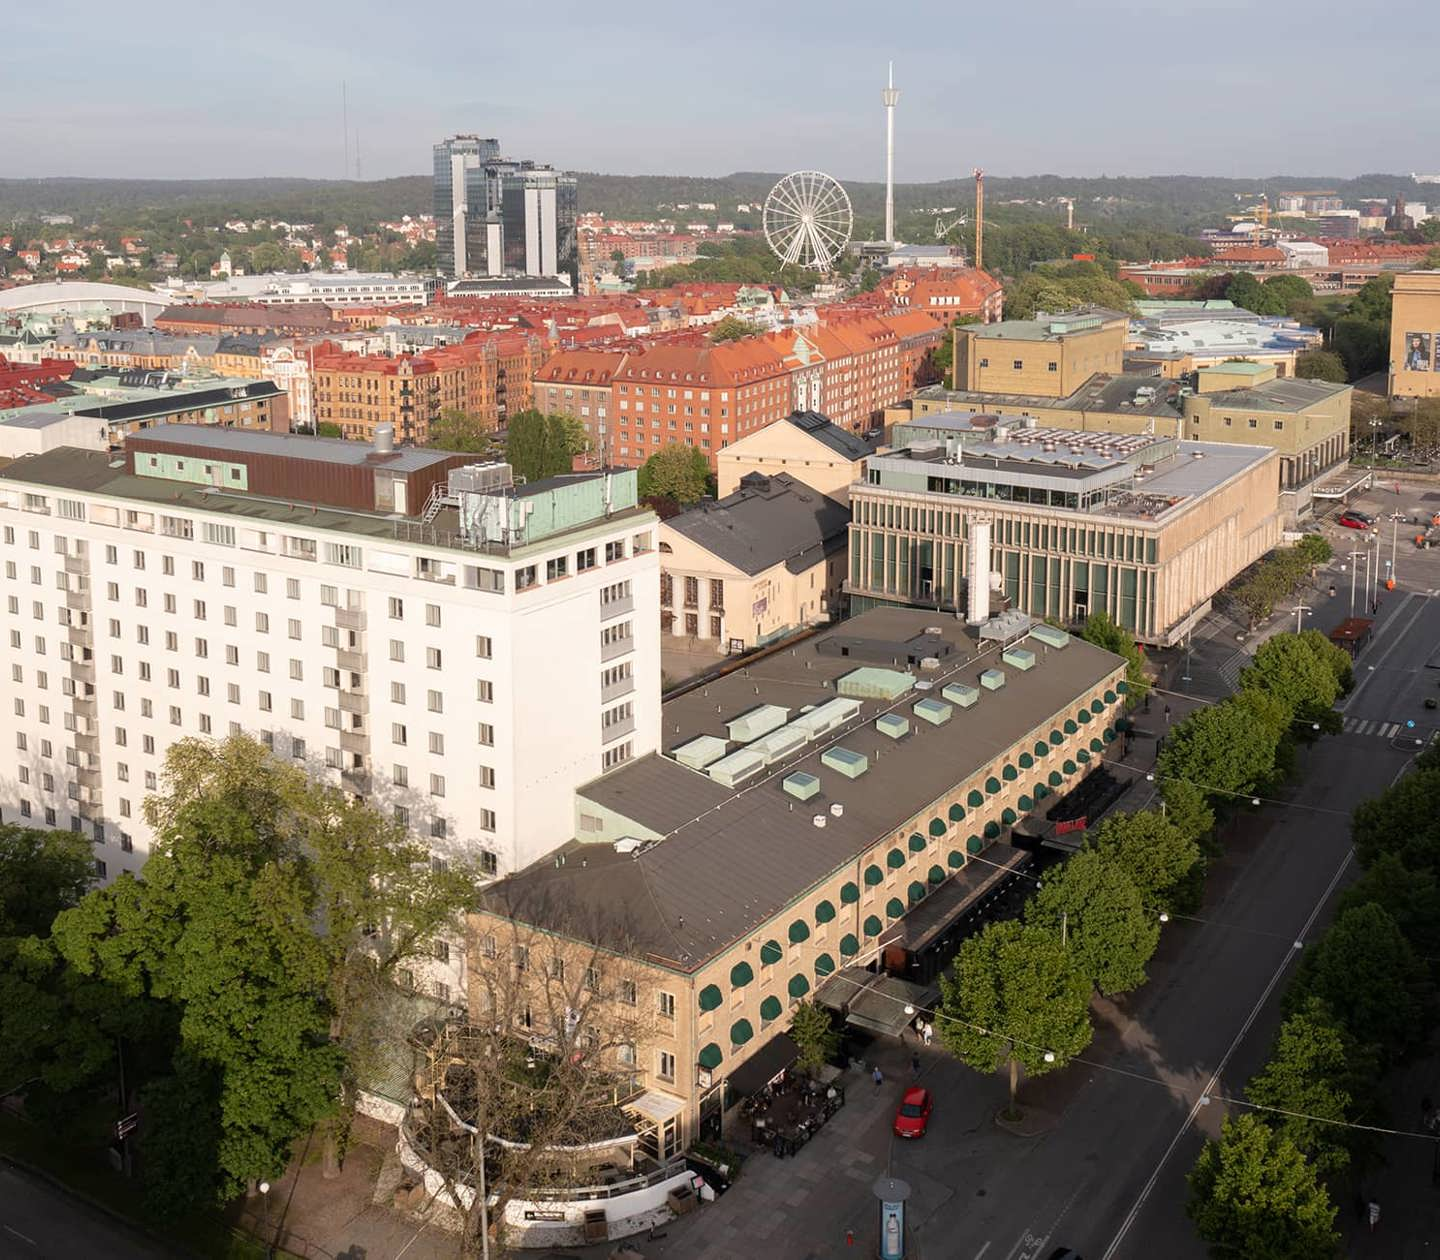 A view of the city of Gothenburg